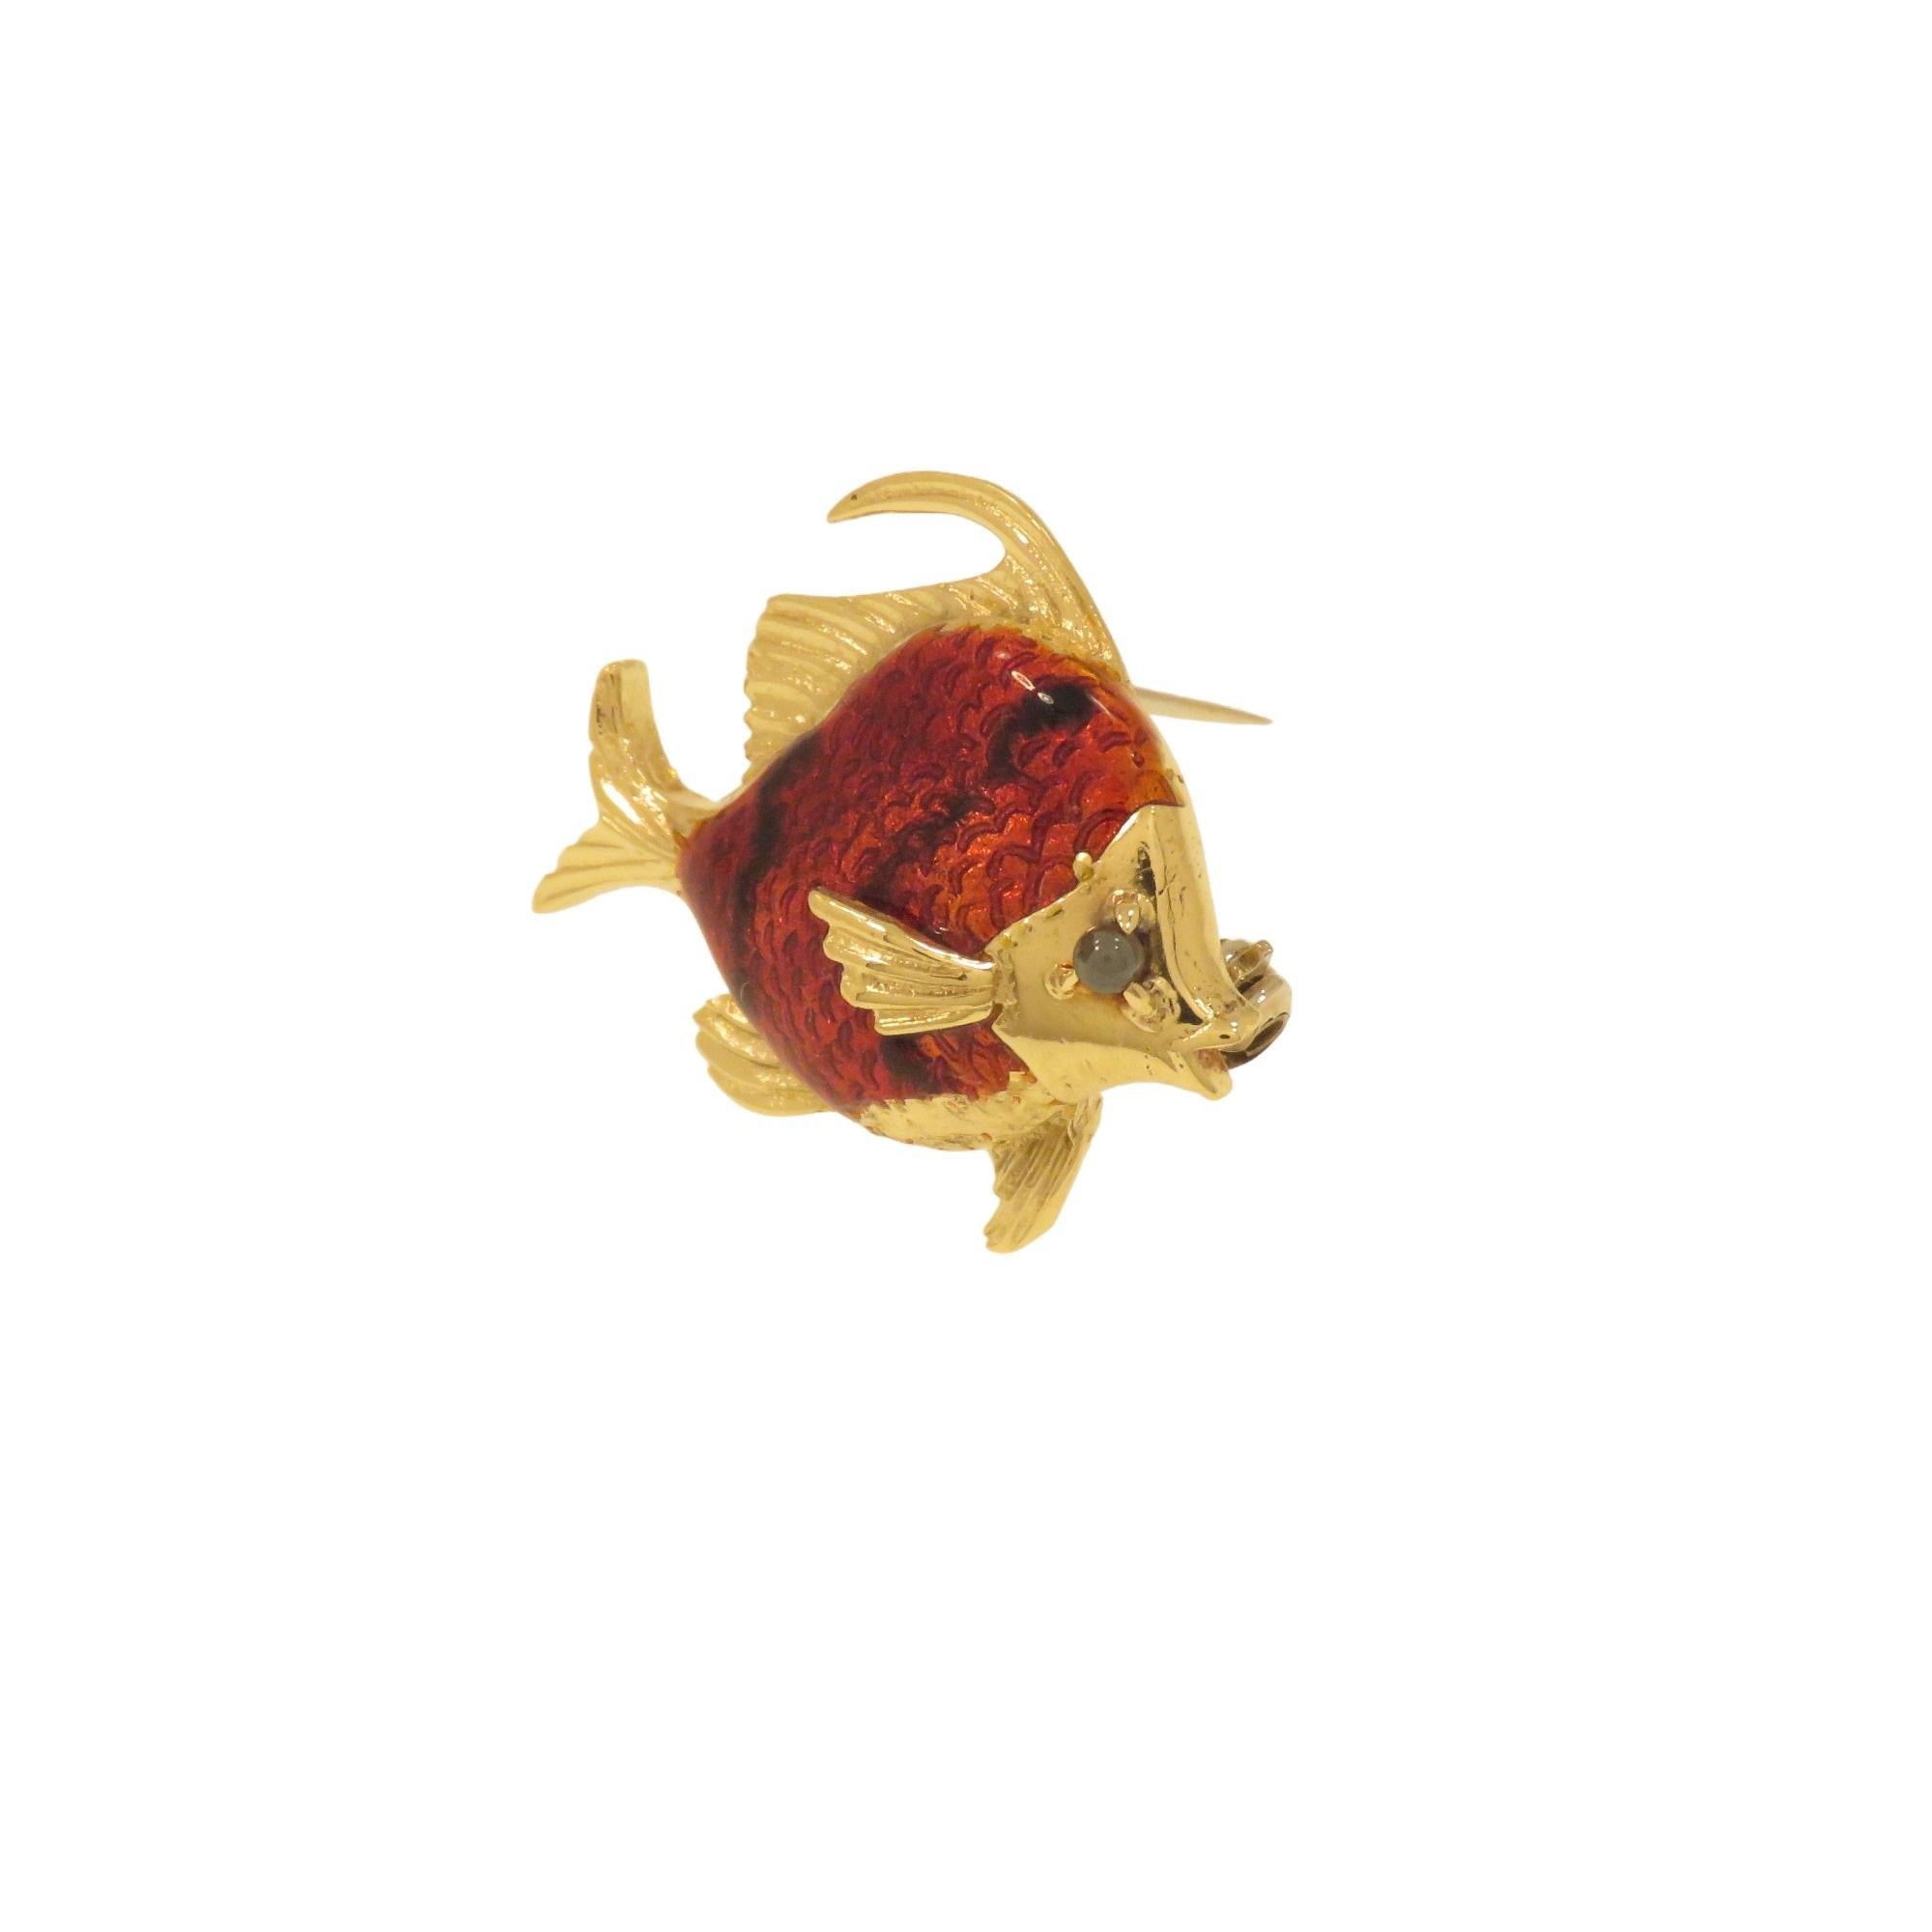 This pretty brooch handmade in Italy between 1960 and 1970 features a realistic colorful fish. The body is 18K yellow gold with fire enameling with the eye is adorned with a green tourmaline sphere. The brooch has the 750 mark of 18K gold. The